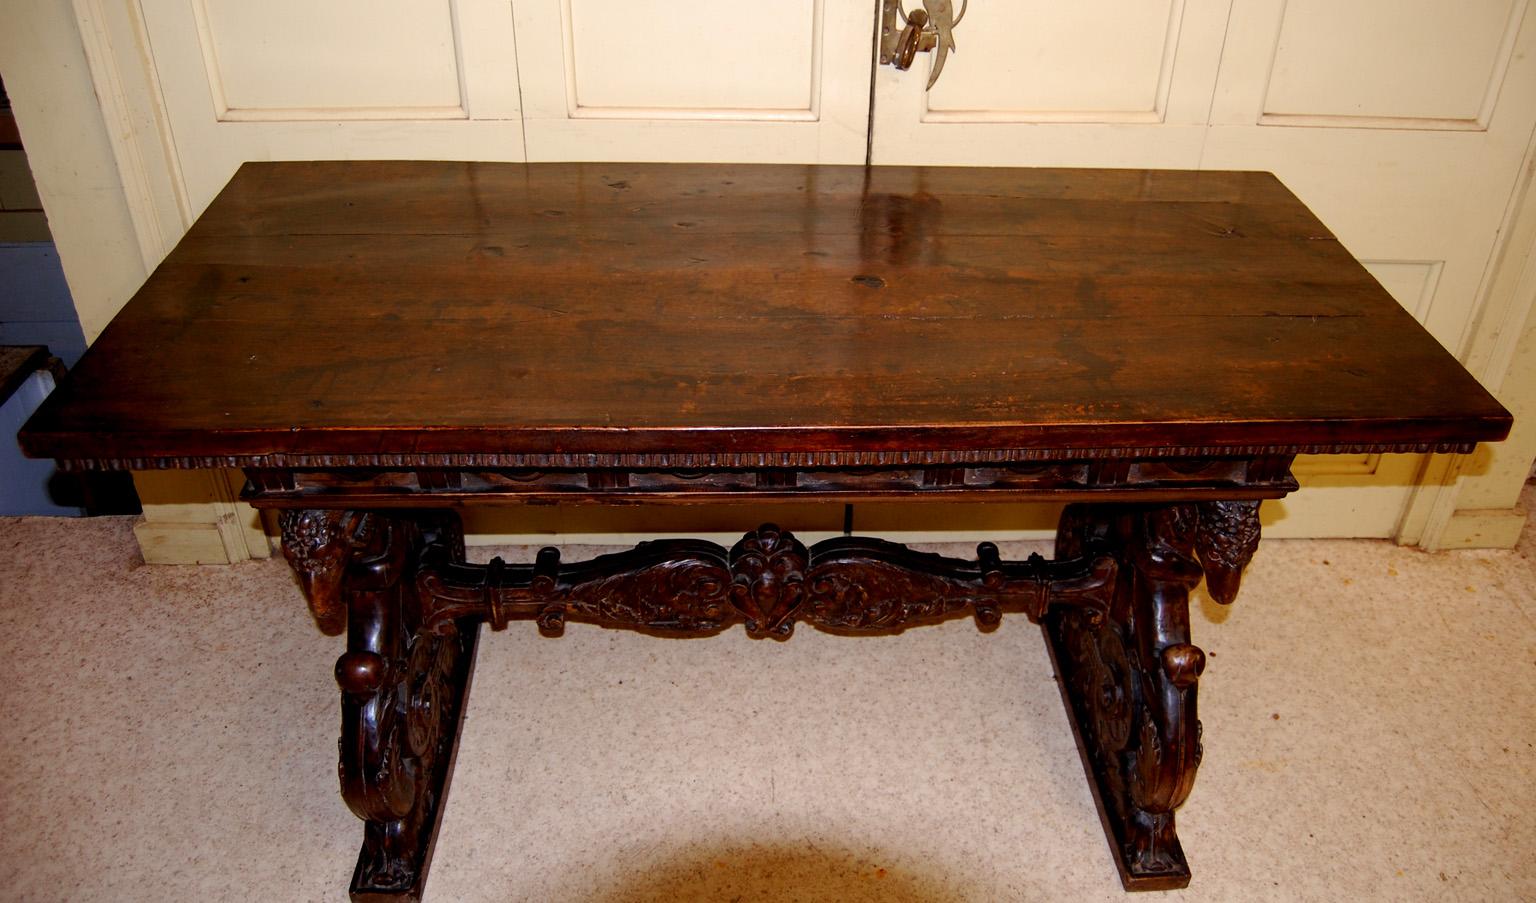 Italian 17th century carved walnut center table with scrolled carved pedestal ends, central carved stretcher and three plank thick walnut top with applied carved frieze.  The pedestal ends center on a female figure, framed by strongly carved rams